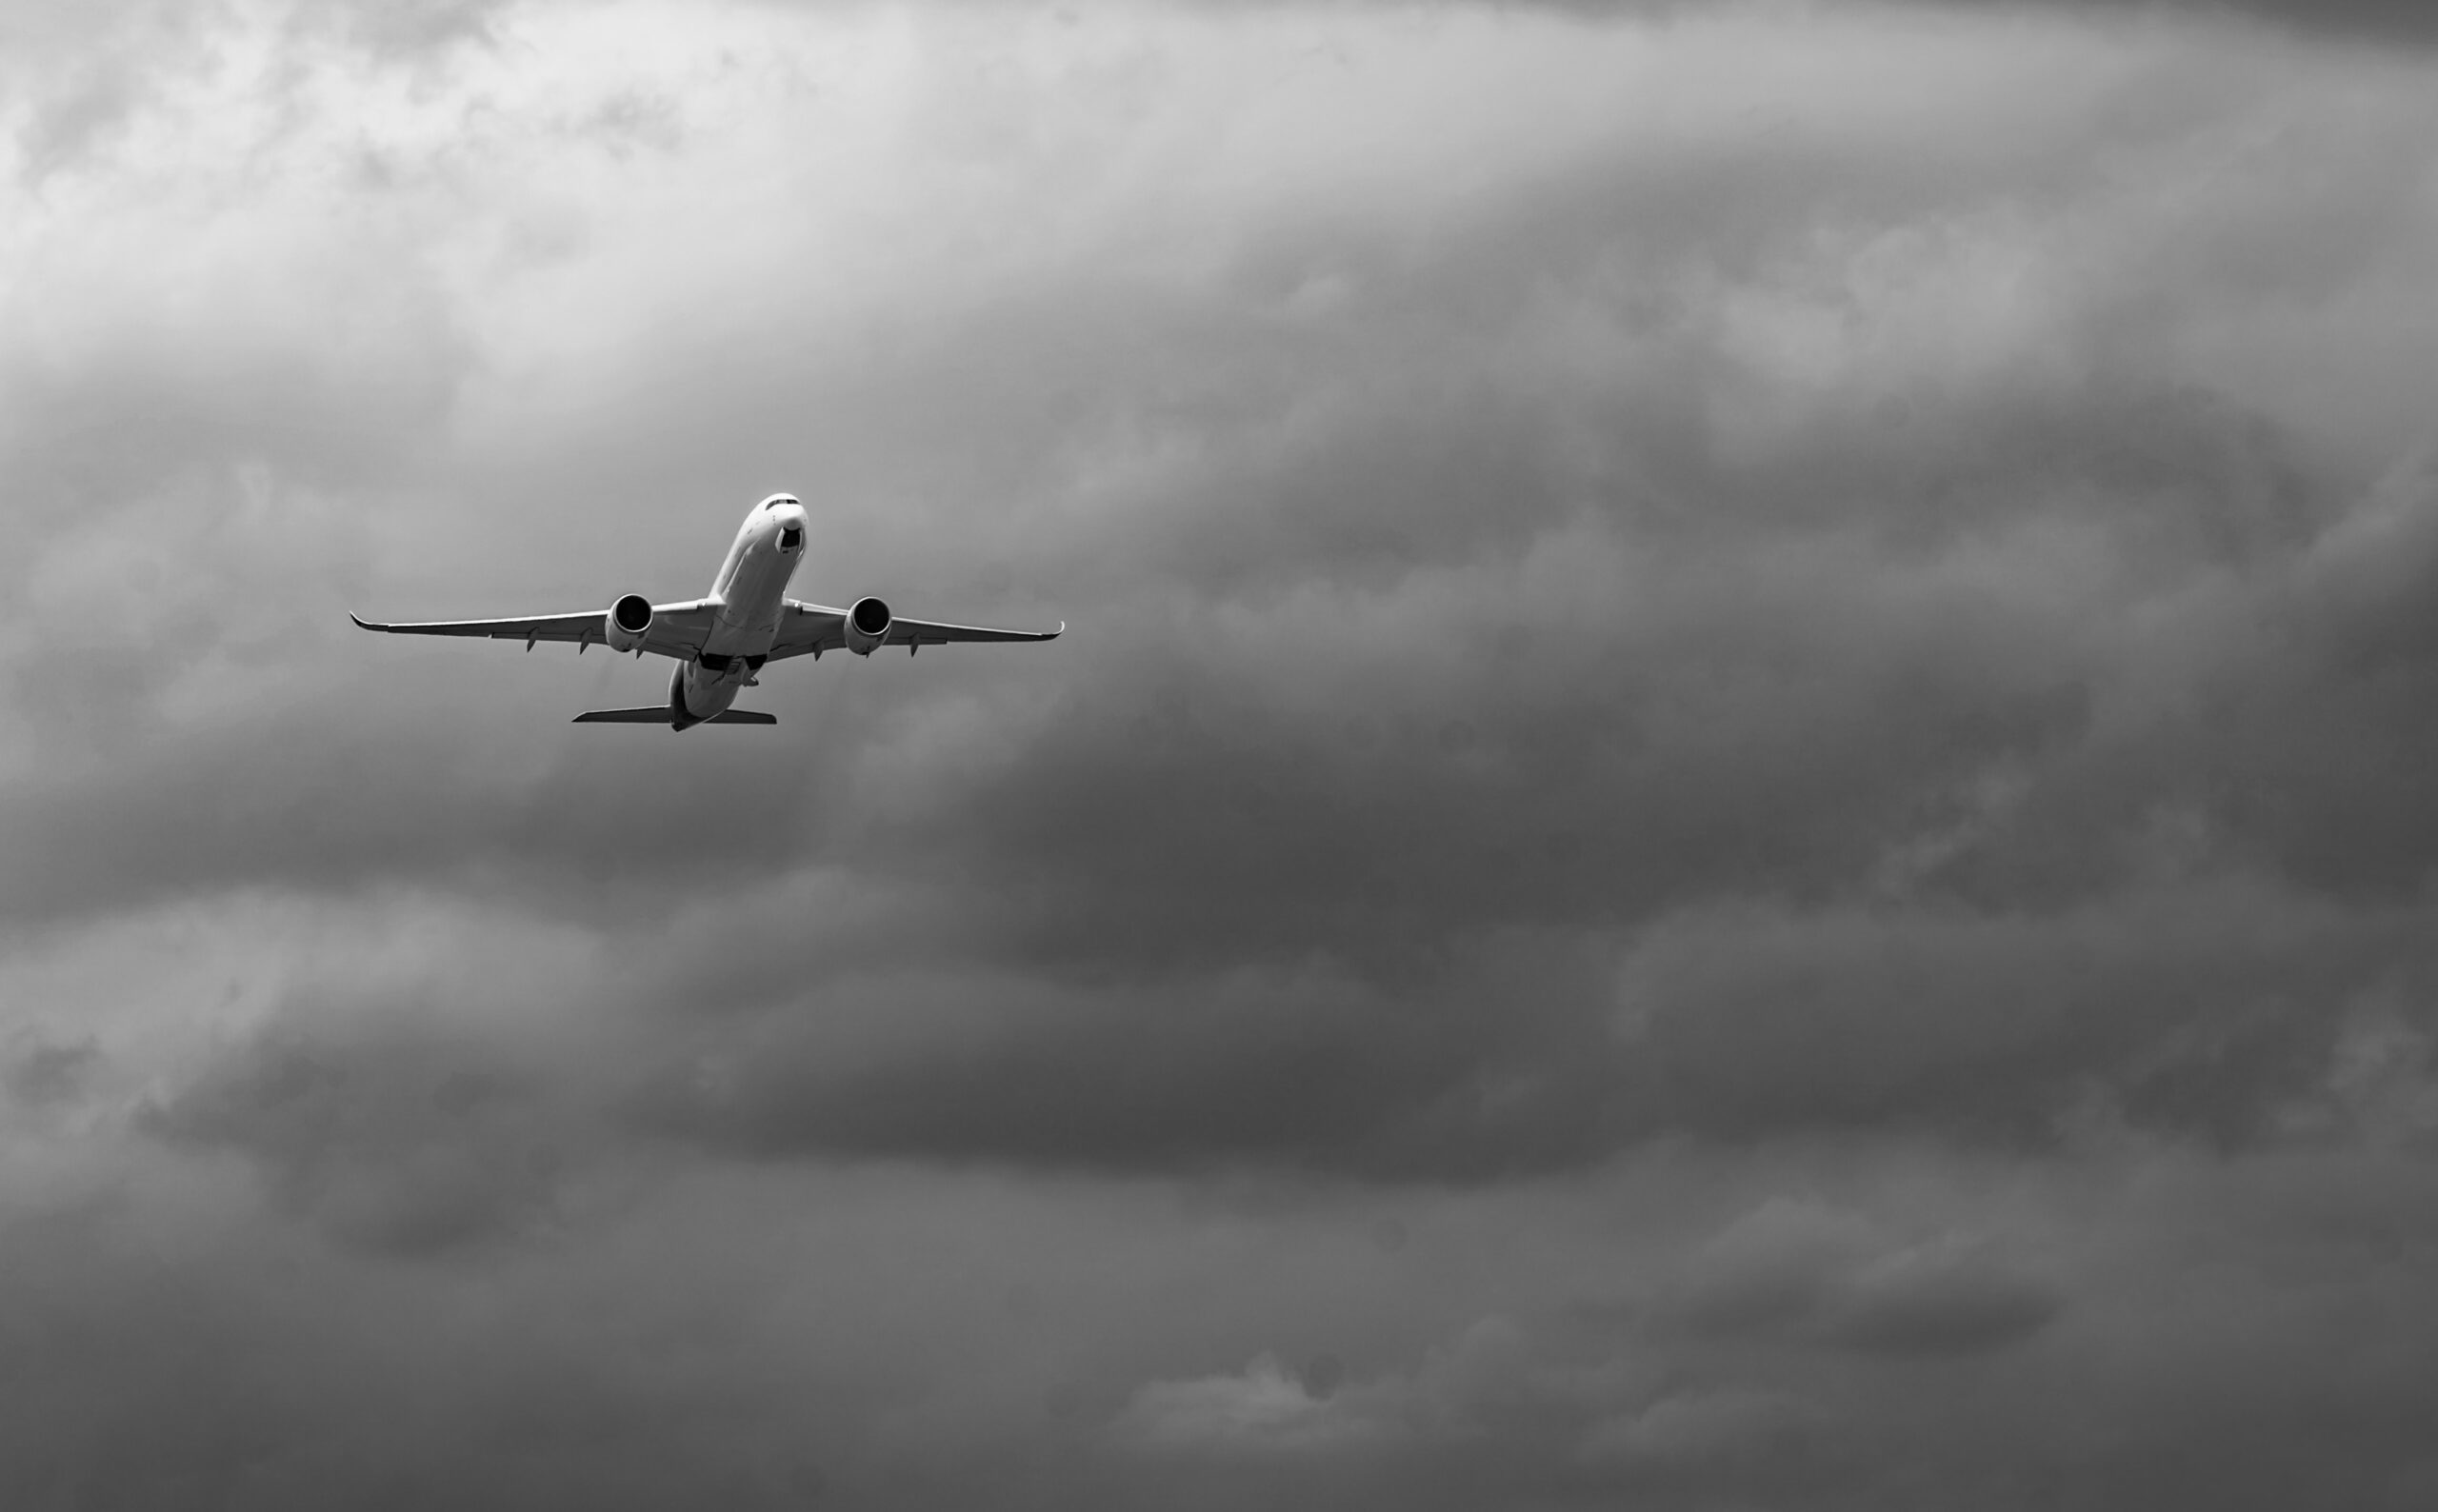 Aviation turbulence soared by up to 55% as the world warmed – new research